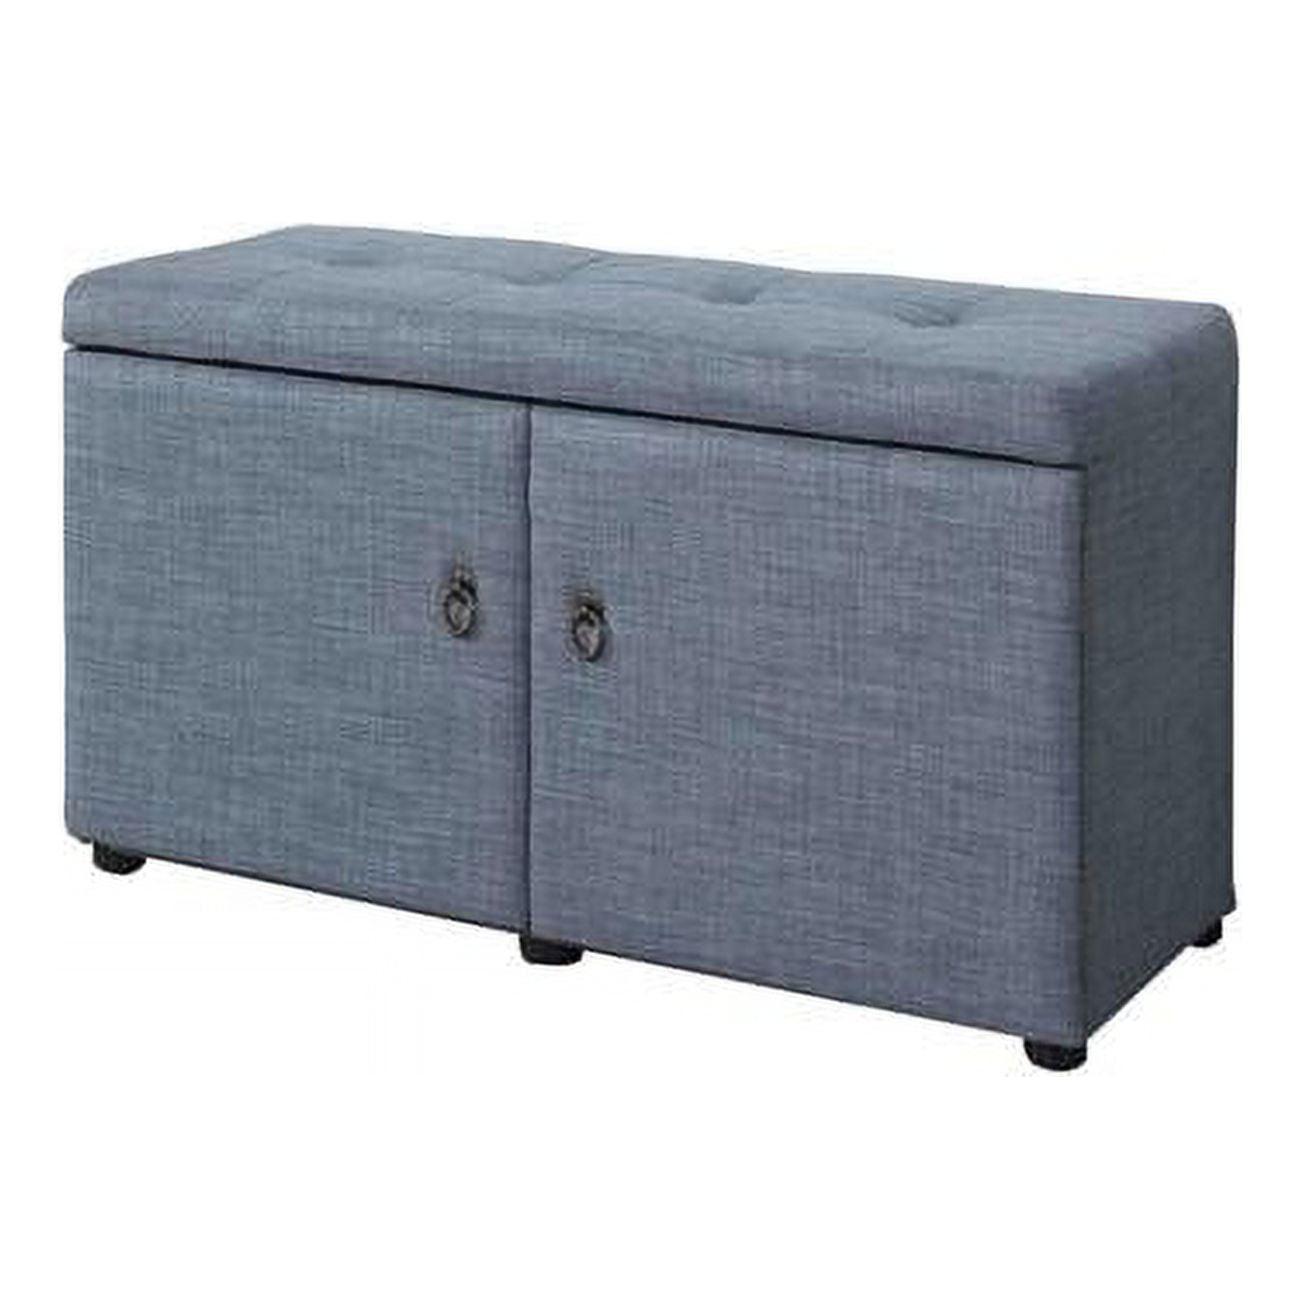 Slate Blue Upholstered Shoe Storage Bench with Button Tufted Seat